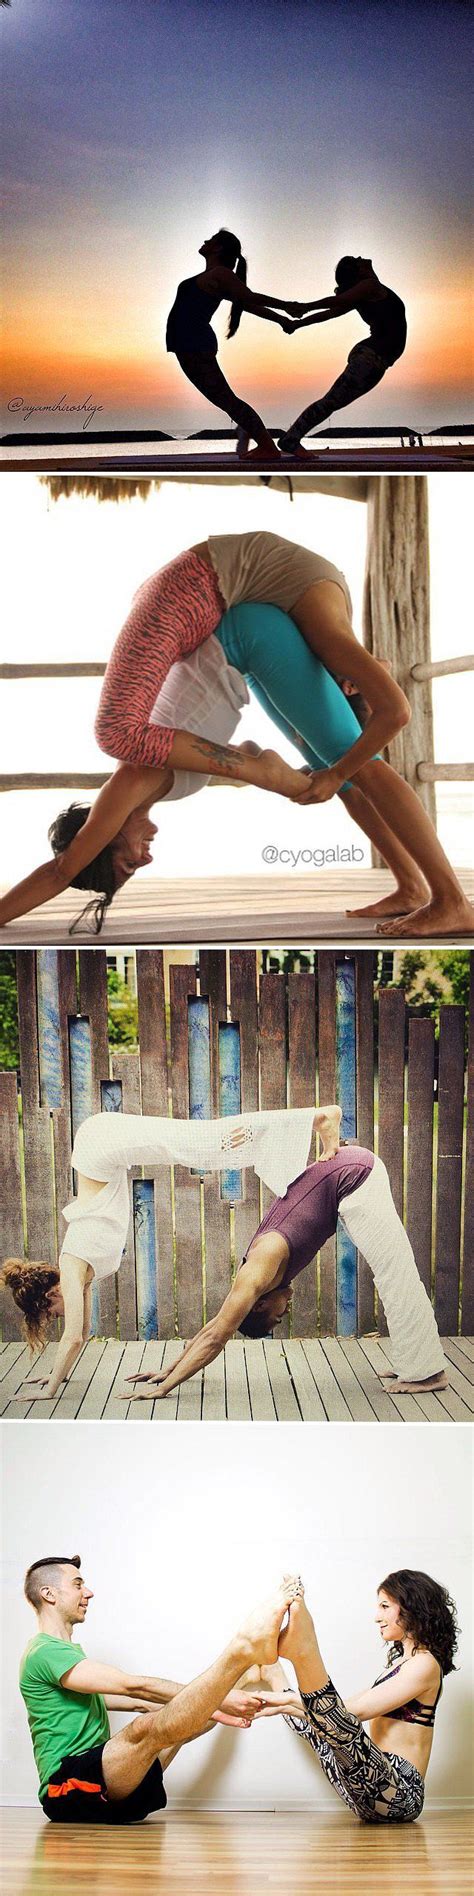 Sometimes our yoga teacher is speaking a different language, which makes it slightly difficult to follow along. 58 best images about 2 person yoga poses on Pinterest ...